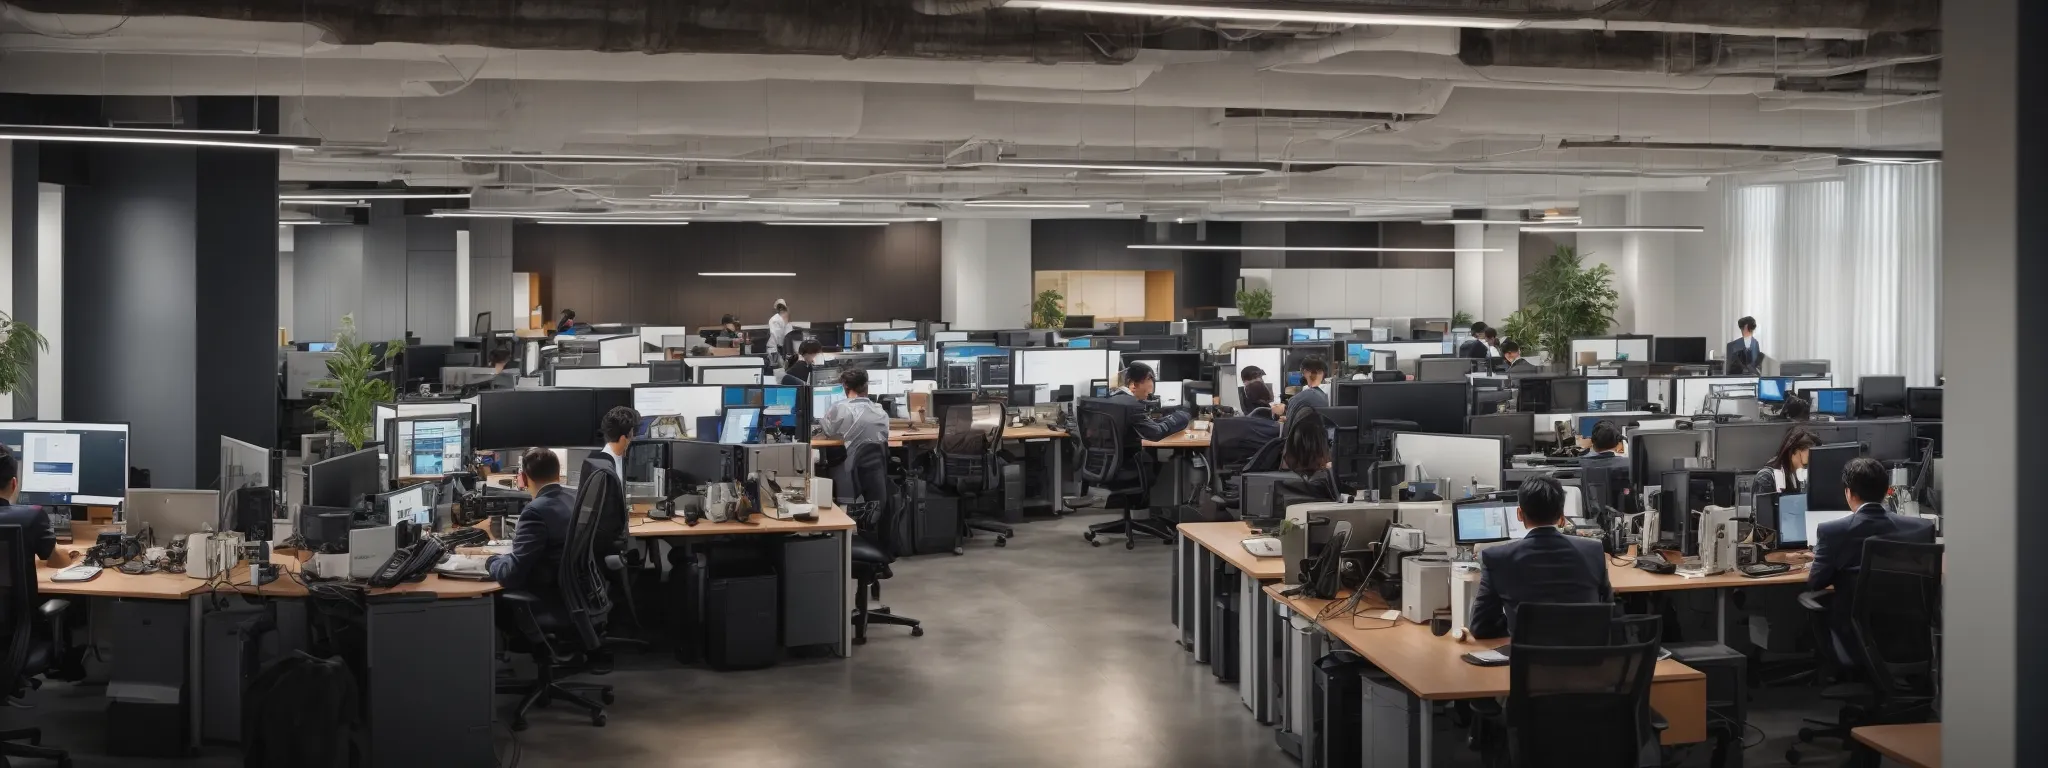 a modern, open-plan office bustling with professionals working on computers amid collaborative spaces.